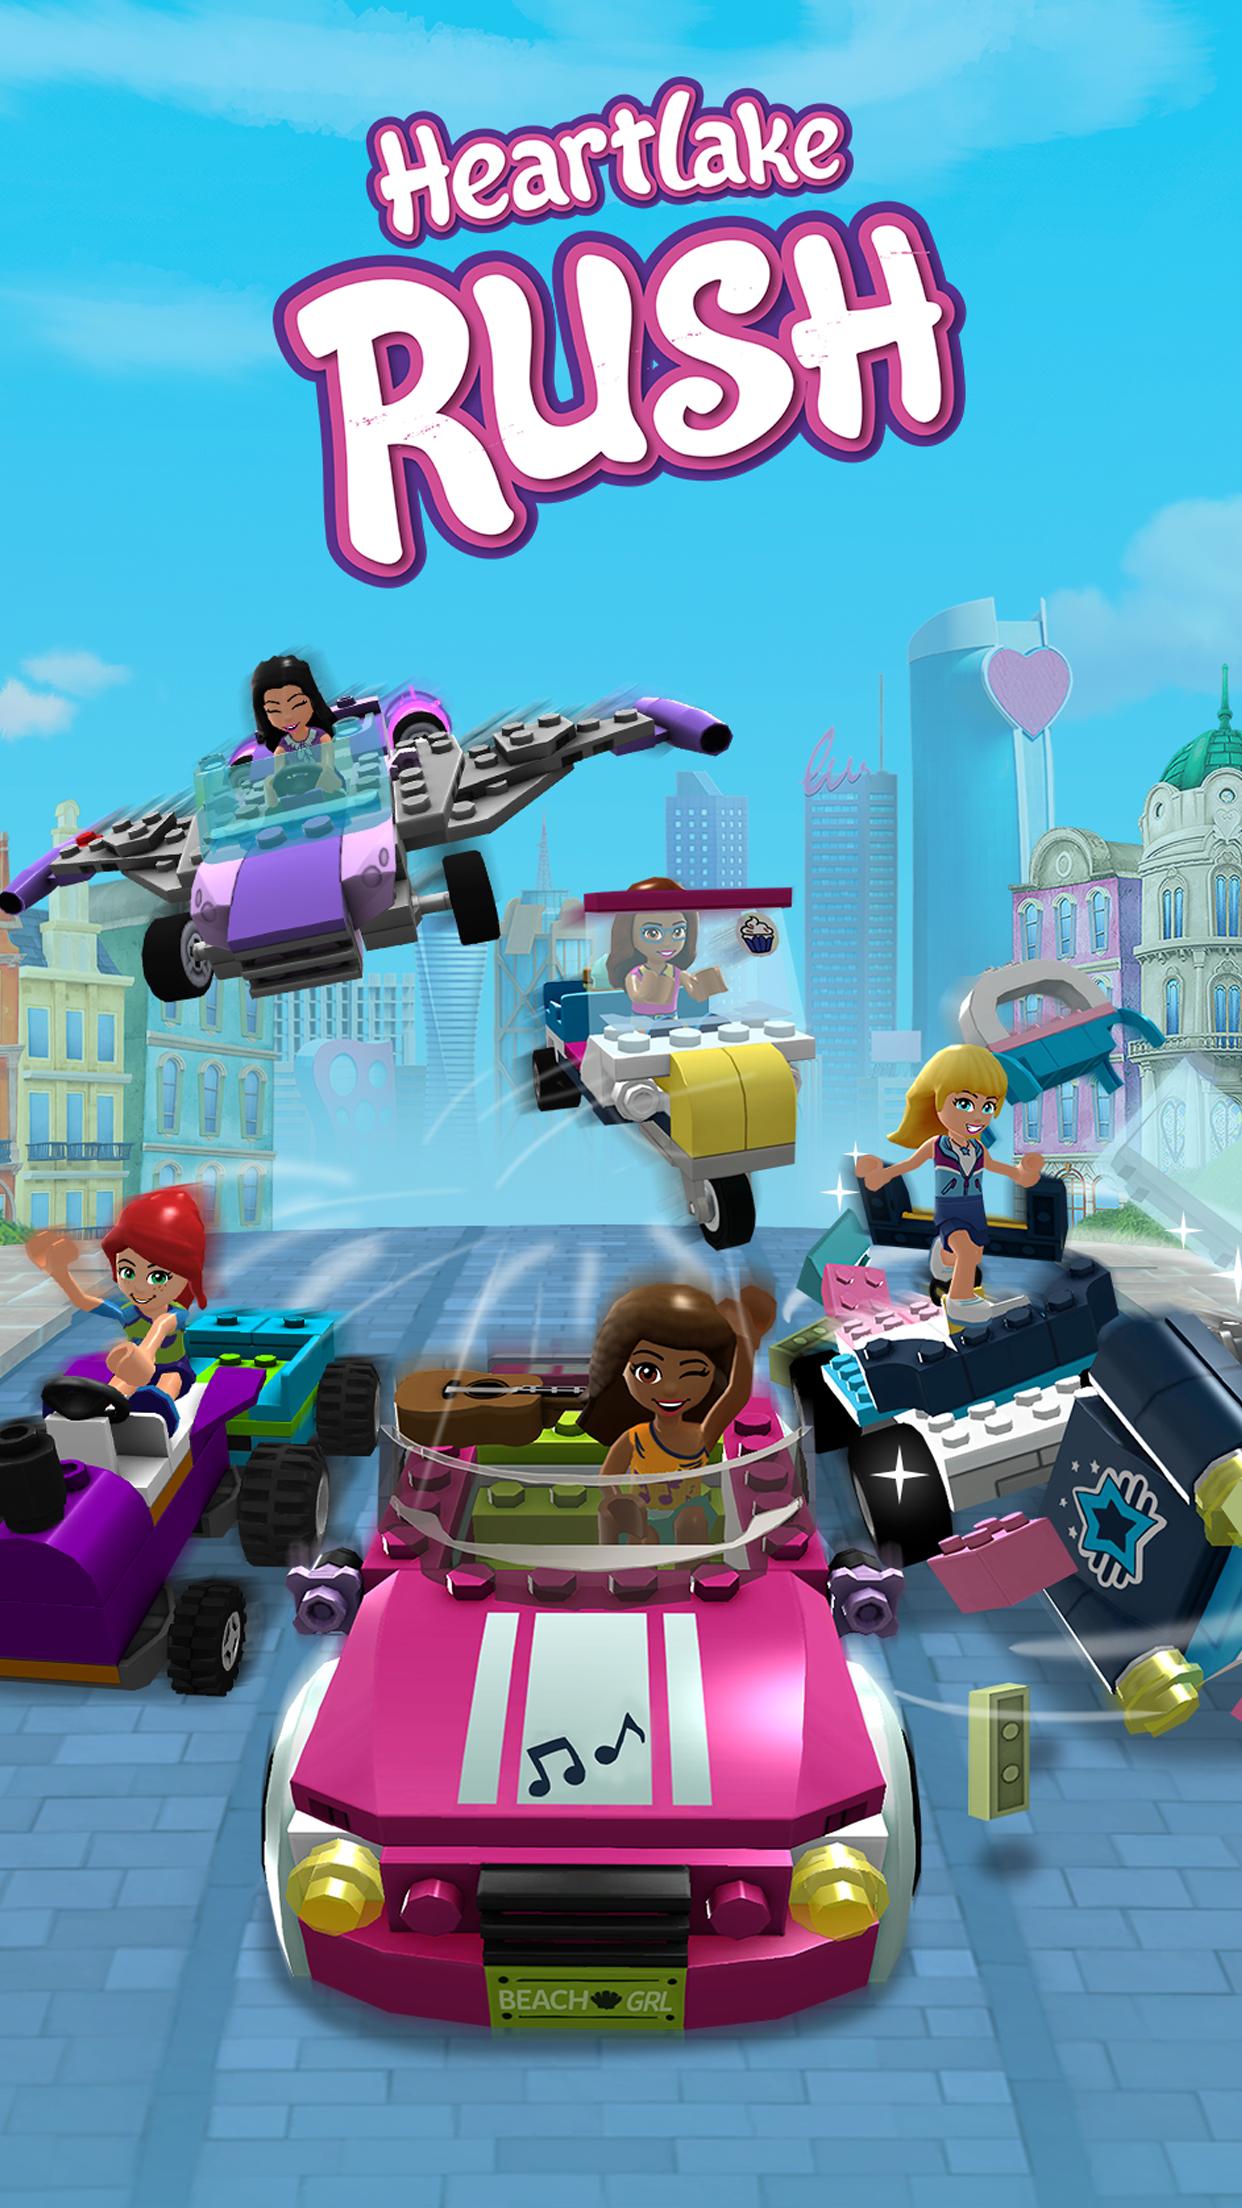 LEGO® Friends: Heartlake Rush for Android - APK Download